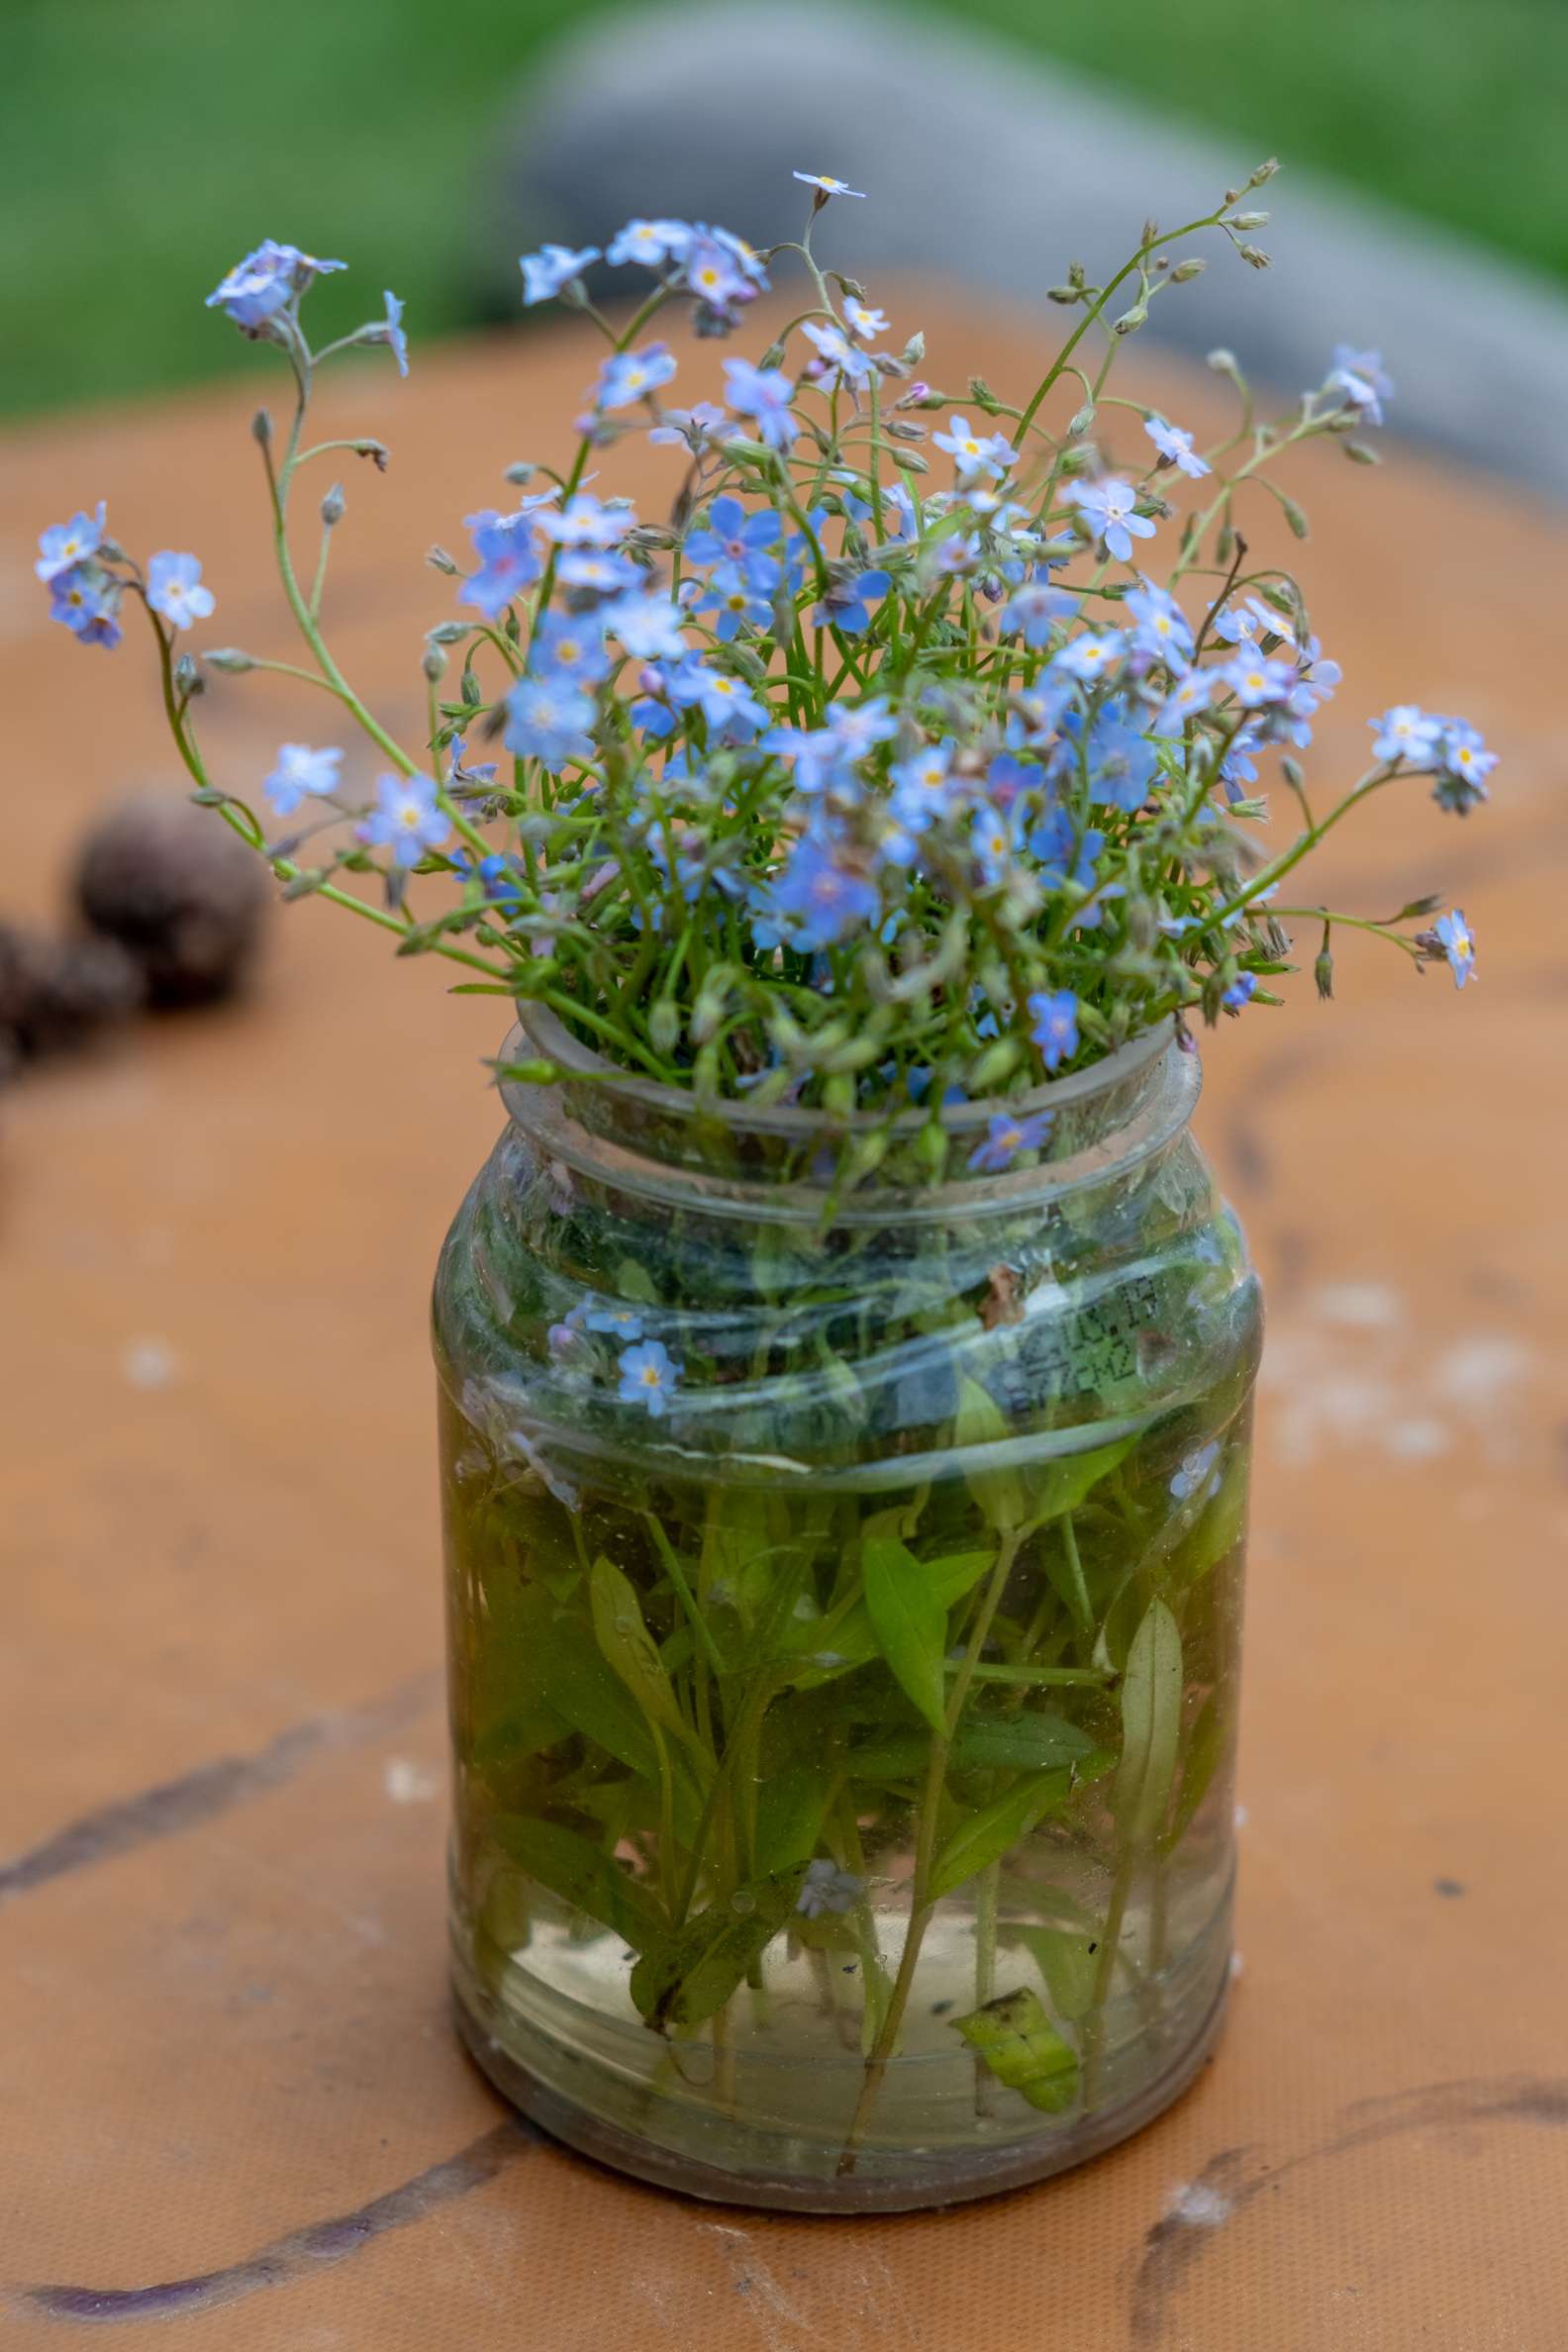 A jar with blue wildflowers someone put on the table at the picnic area in Borjomi National Park